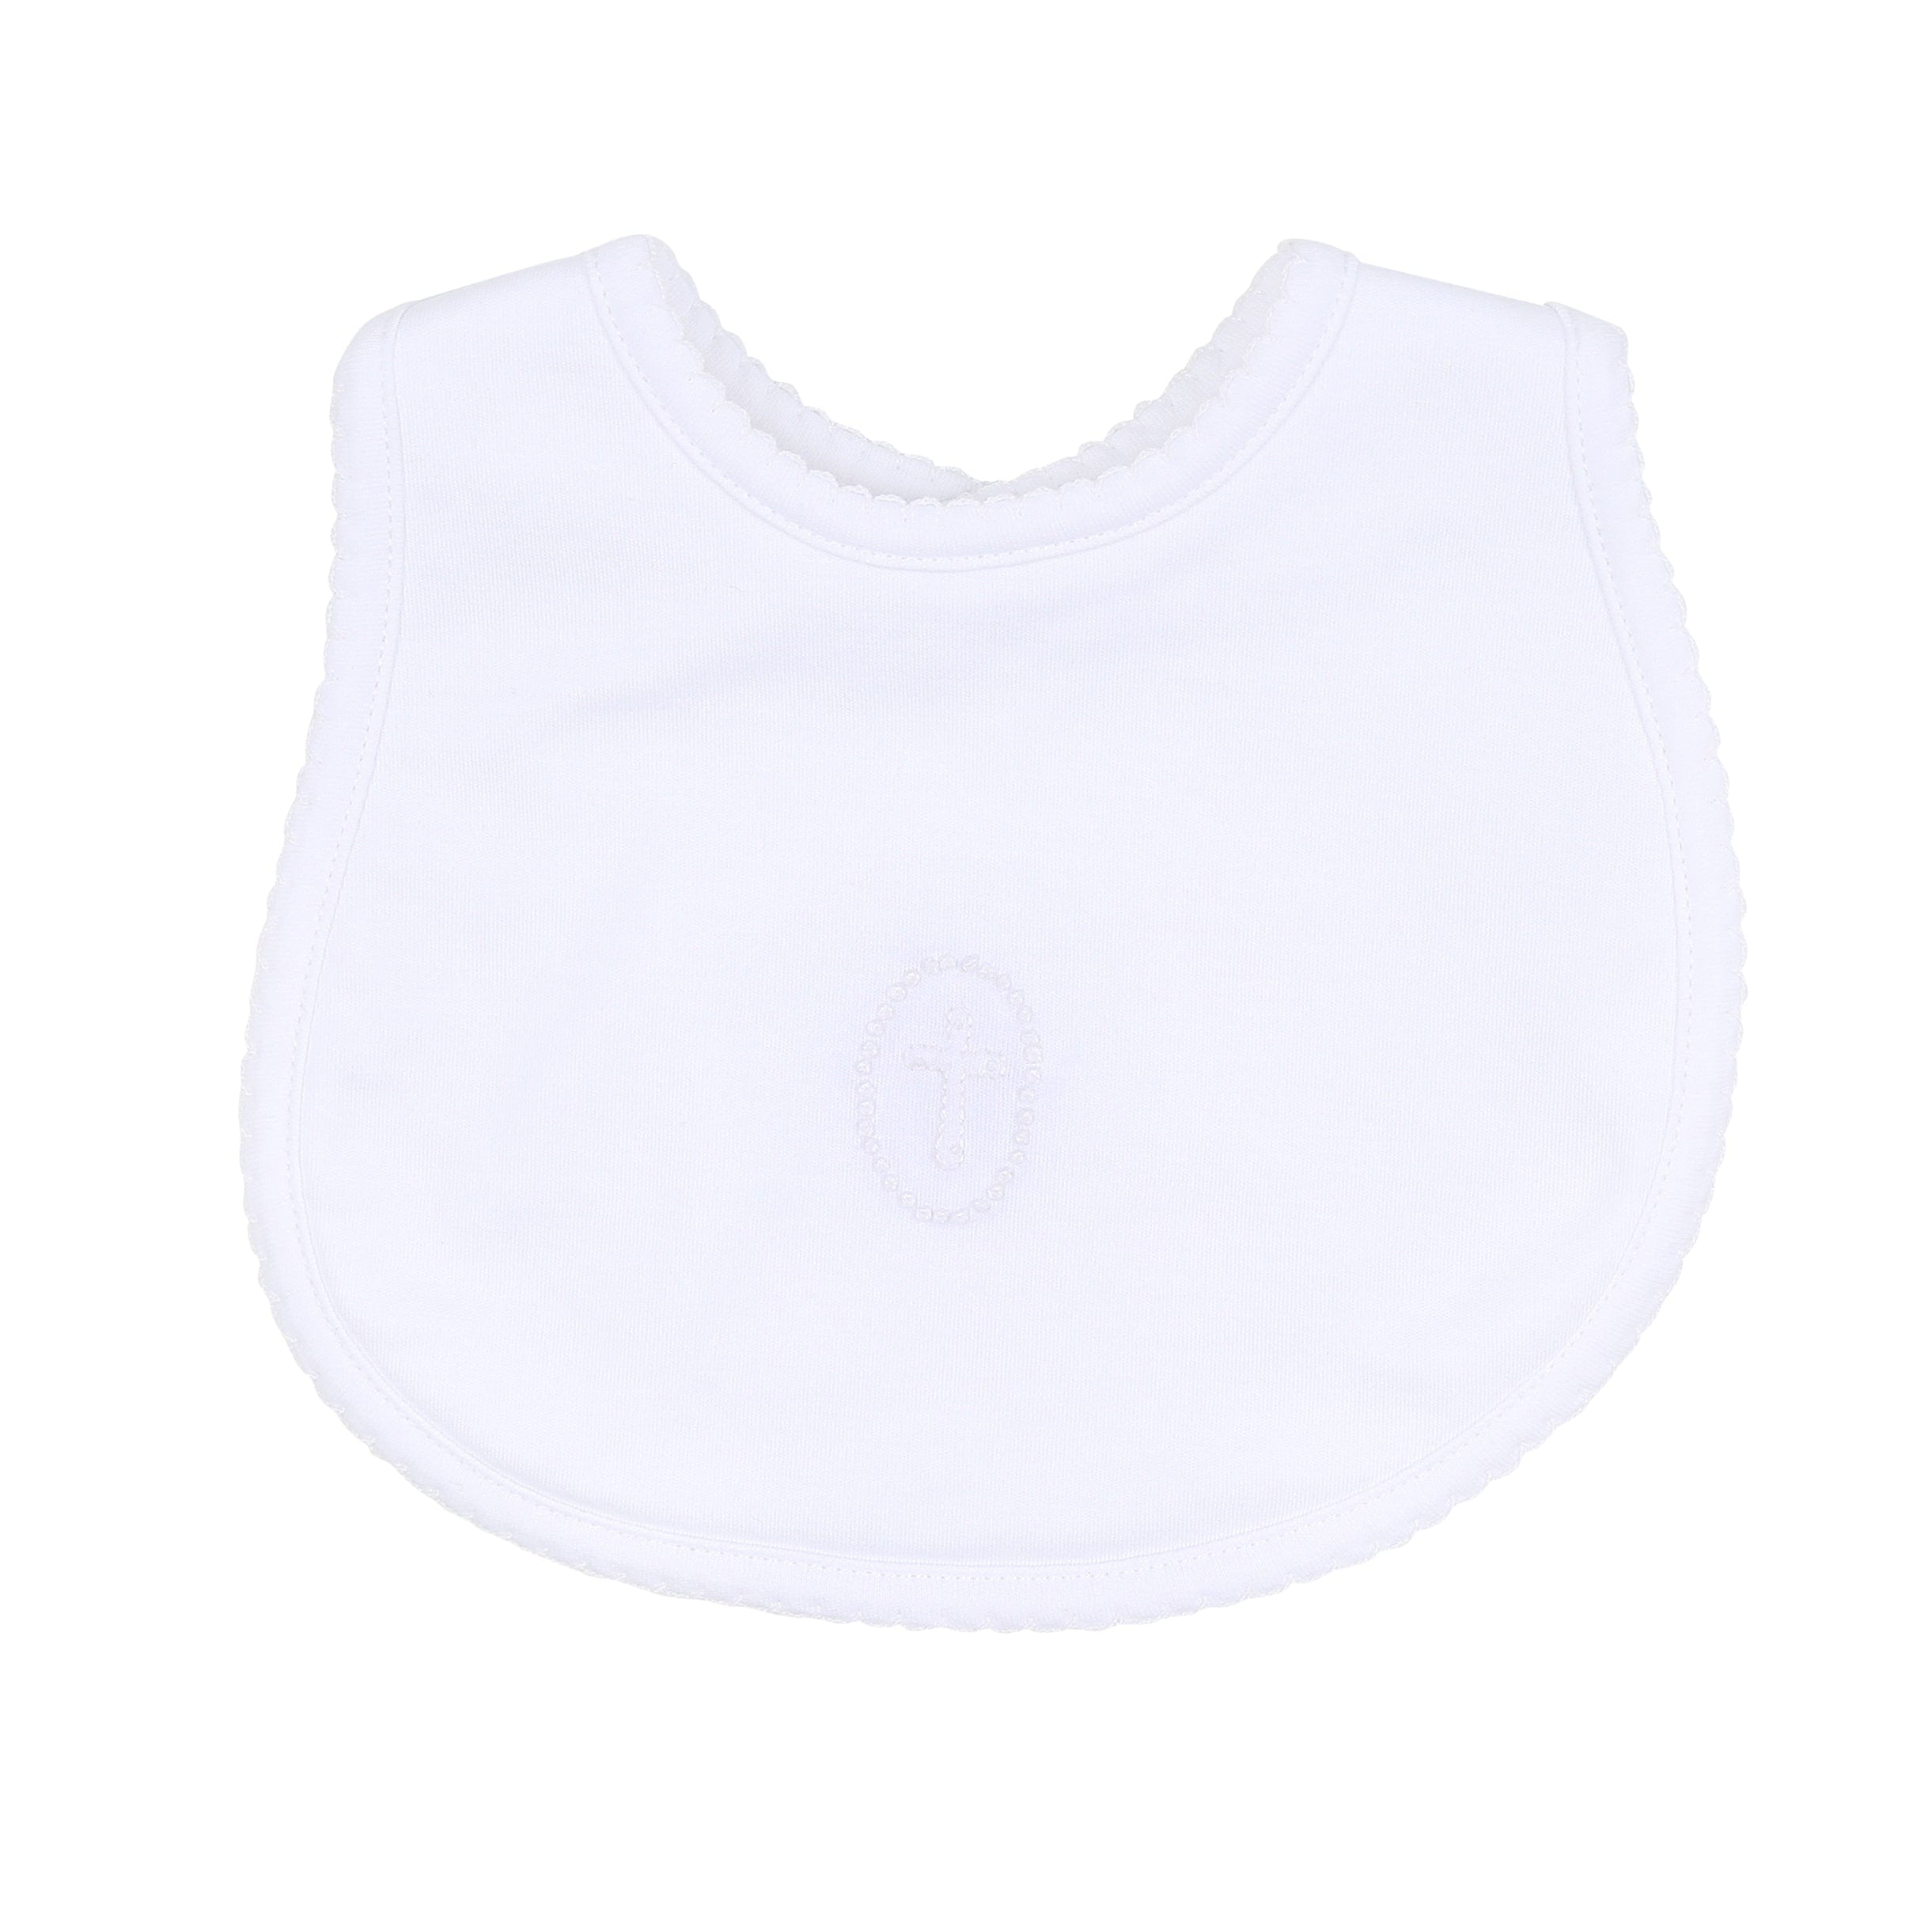 MAGNOLIA BABY - Blessed Embroidered Bib - White